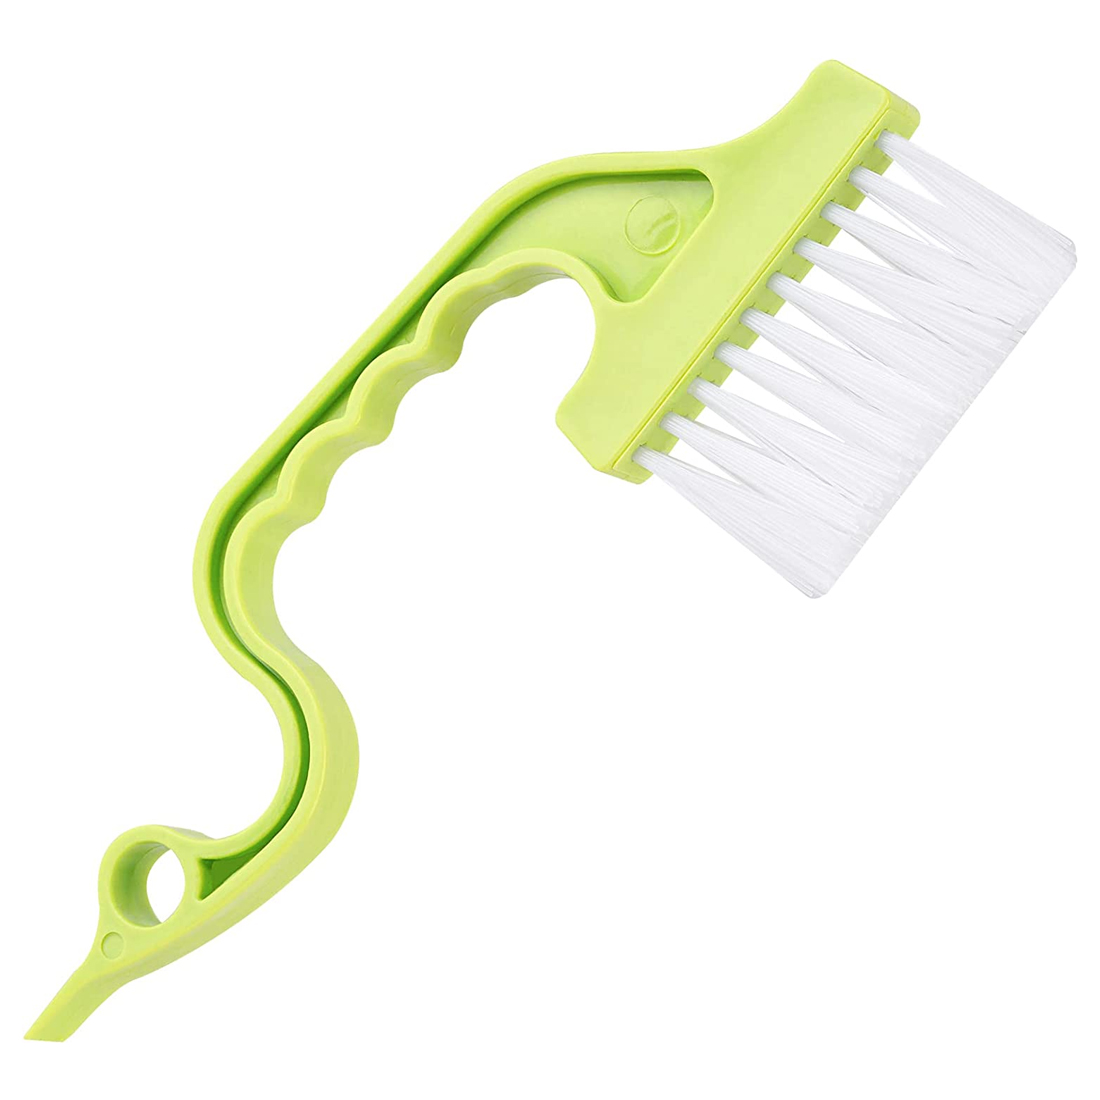 Hand-held Groove Gap Cleaning Tools – Homeydelightshop 125 S Lexington Ave,  Suite 101, Num 63, Asheville, NC 28801 USA